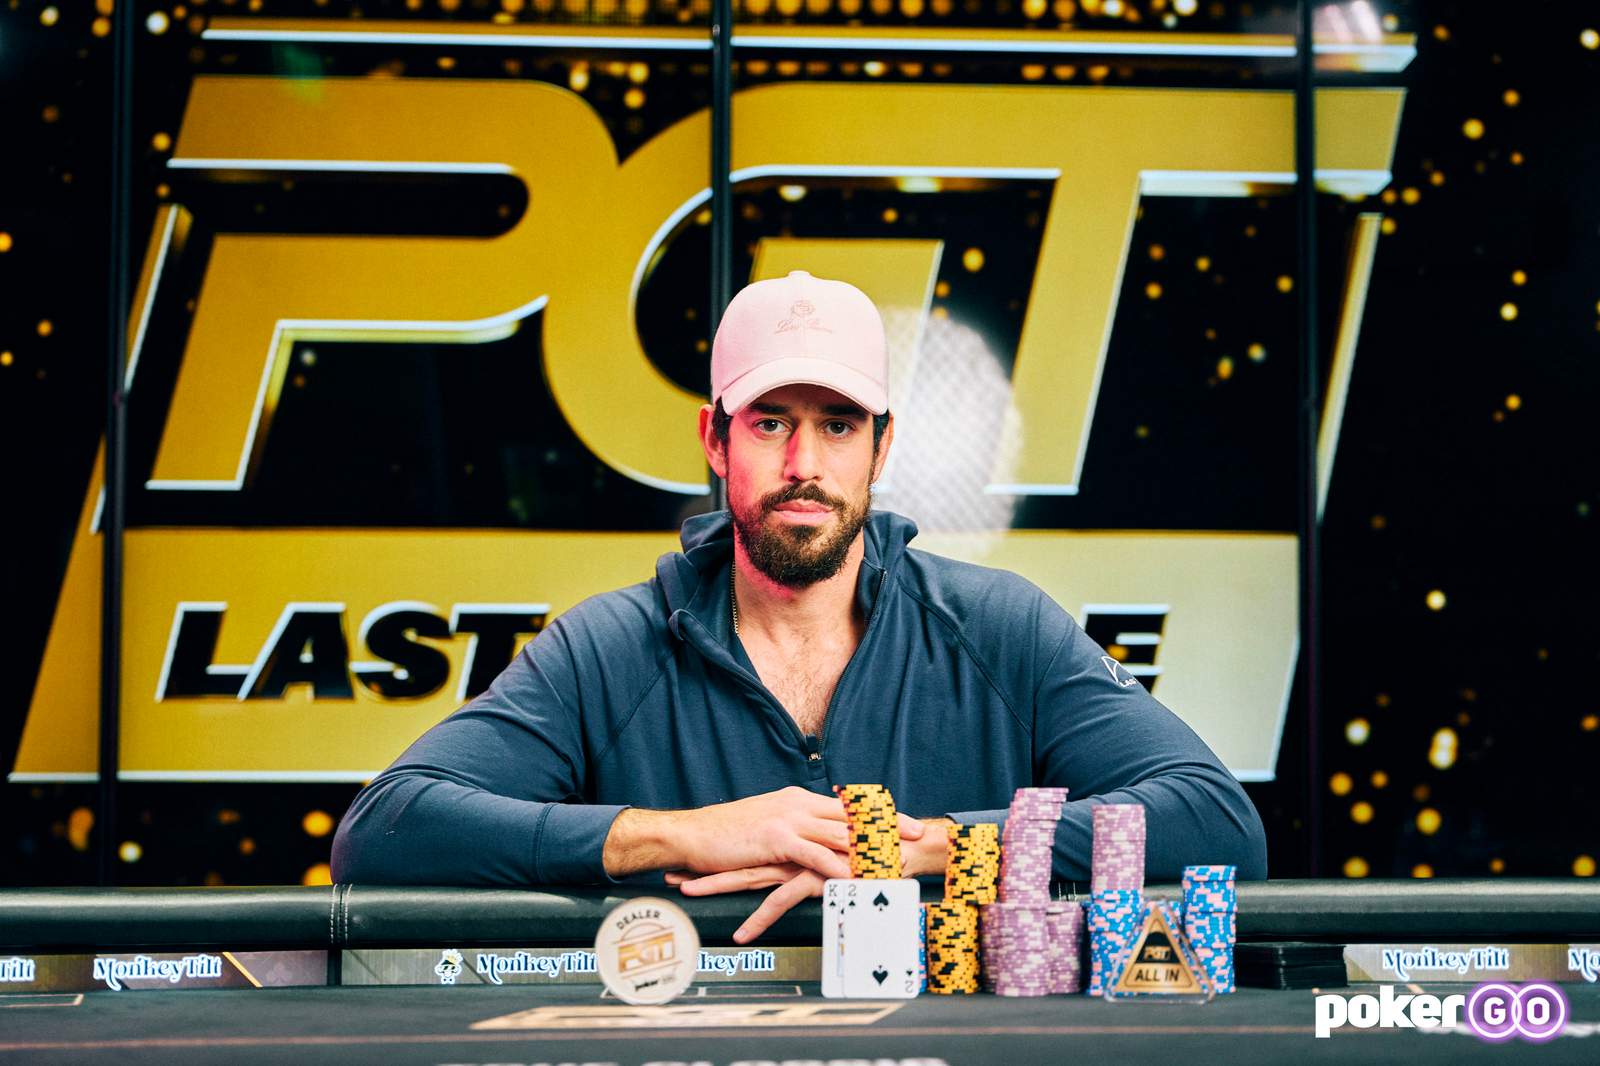 Nick Schulman Wins PGT Last Chance Event #6 for $161,500